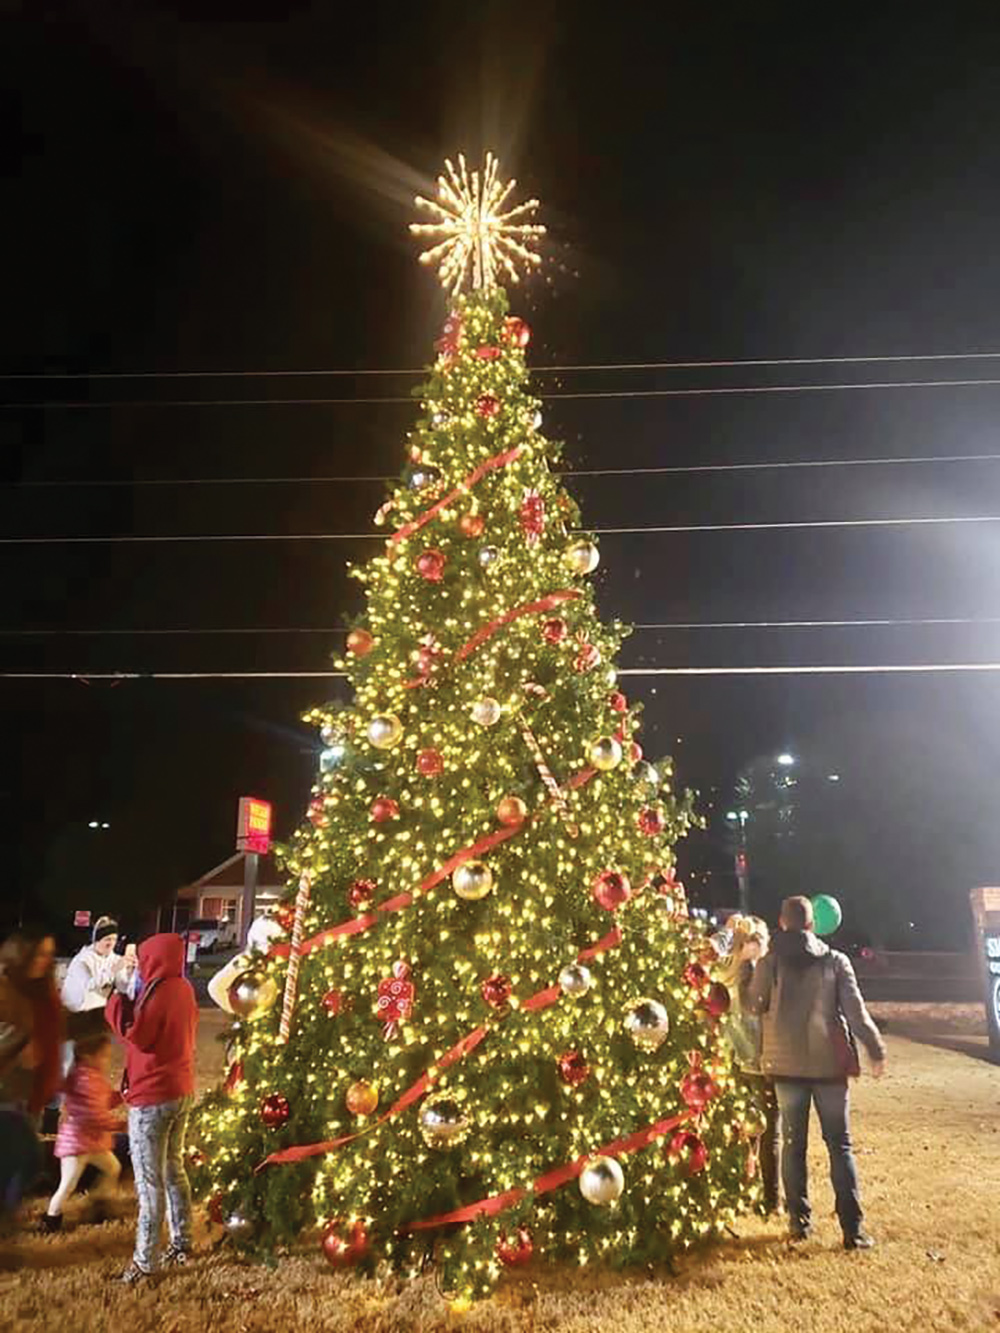 Smiths Station to Host Annual Christmas Tree Lighting Ceremony Dec. 2